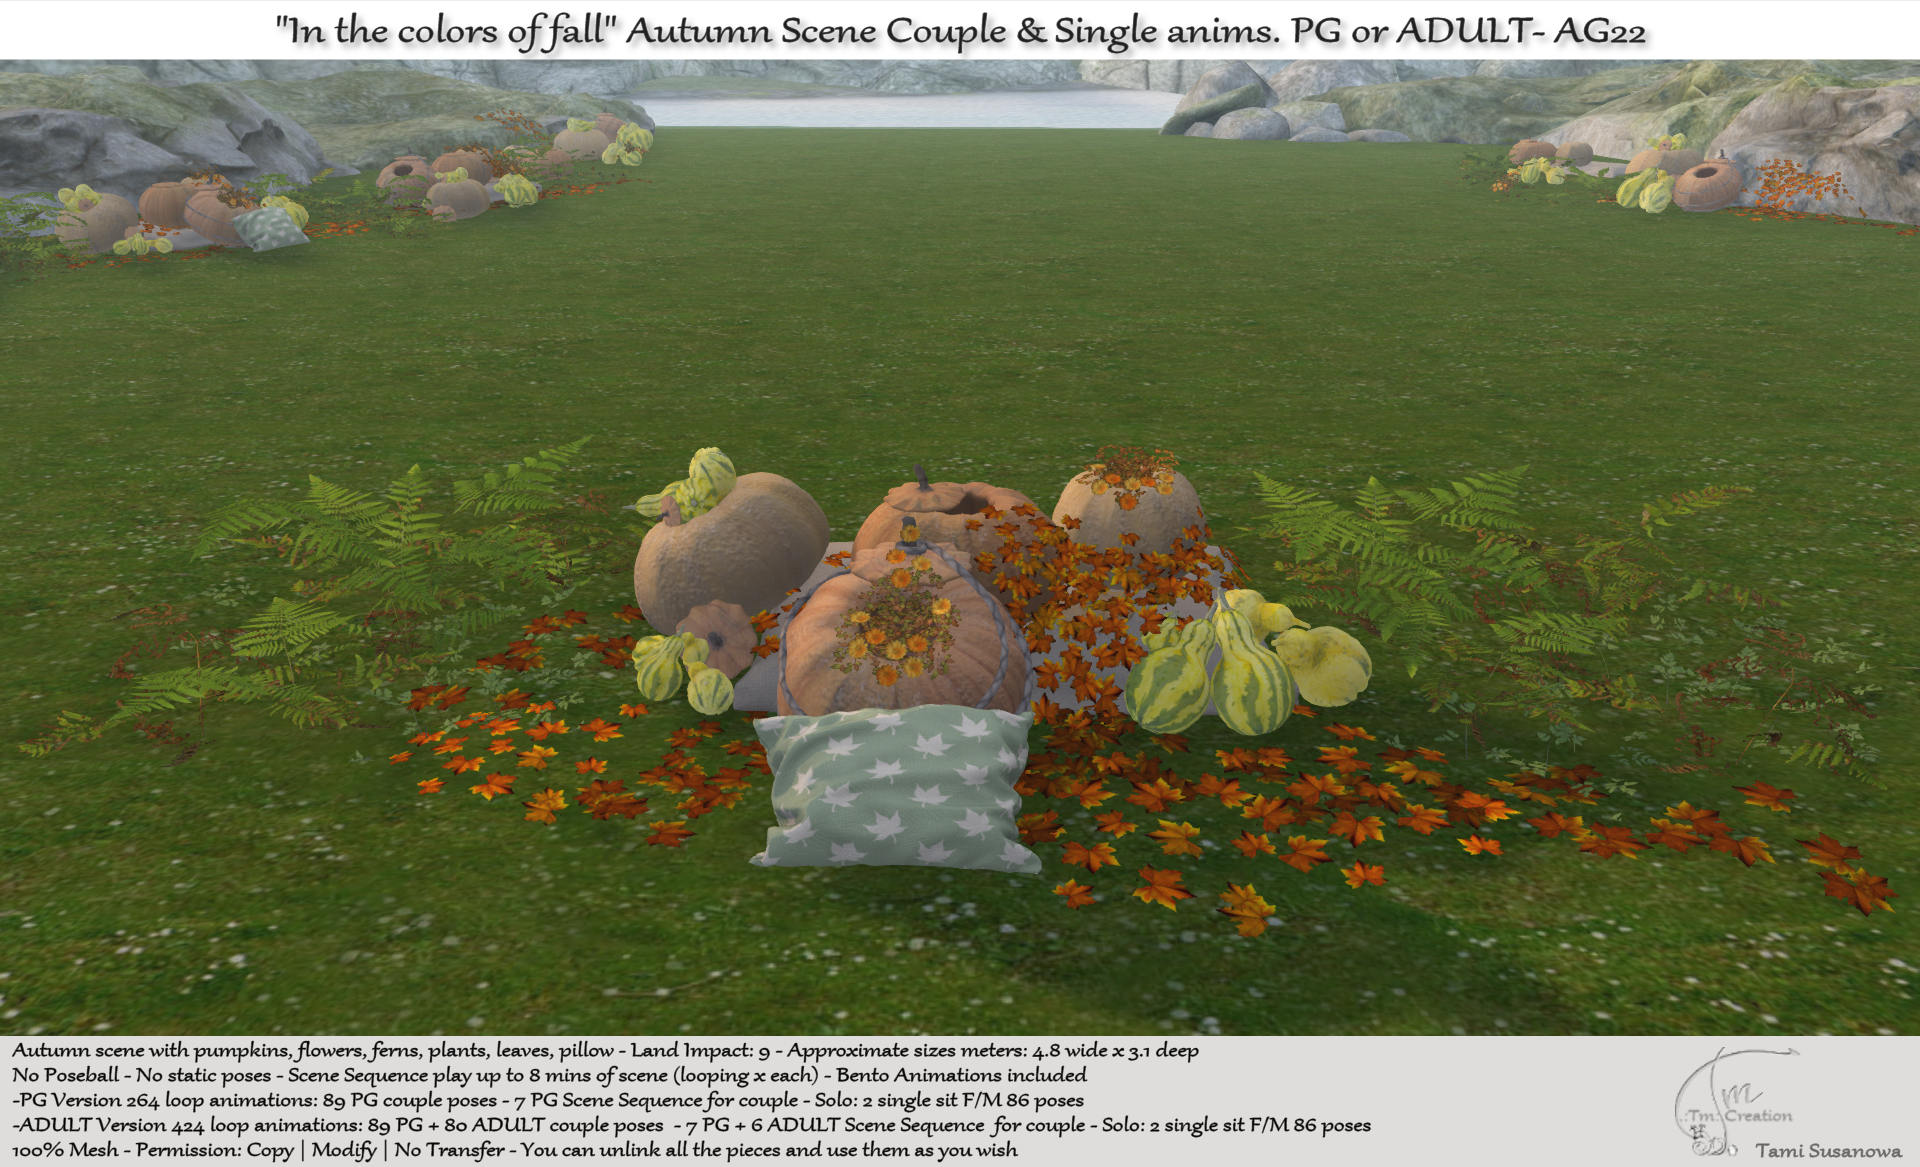 Tm Creation – “In the Colors of Fall” Autumn Scene with Animations